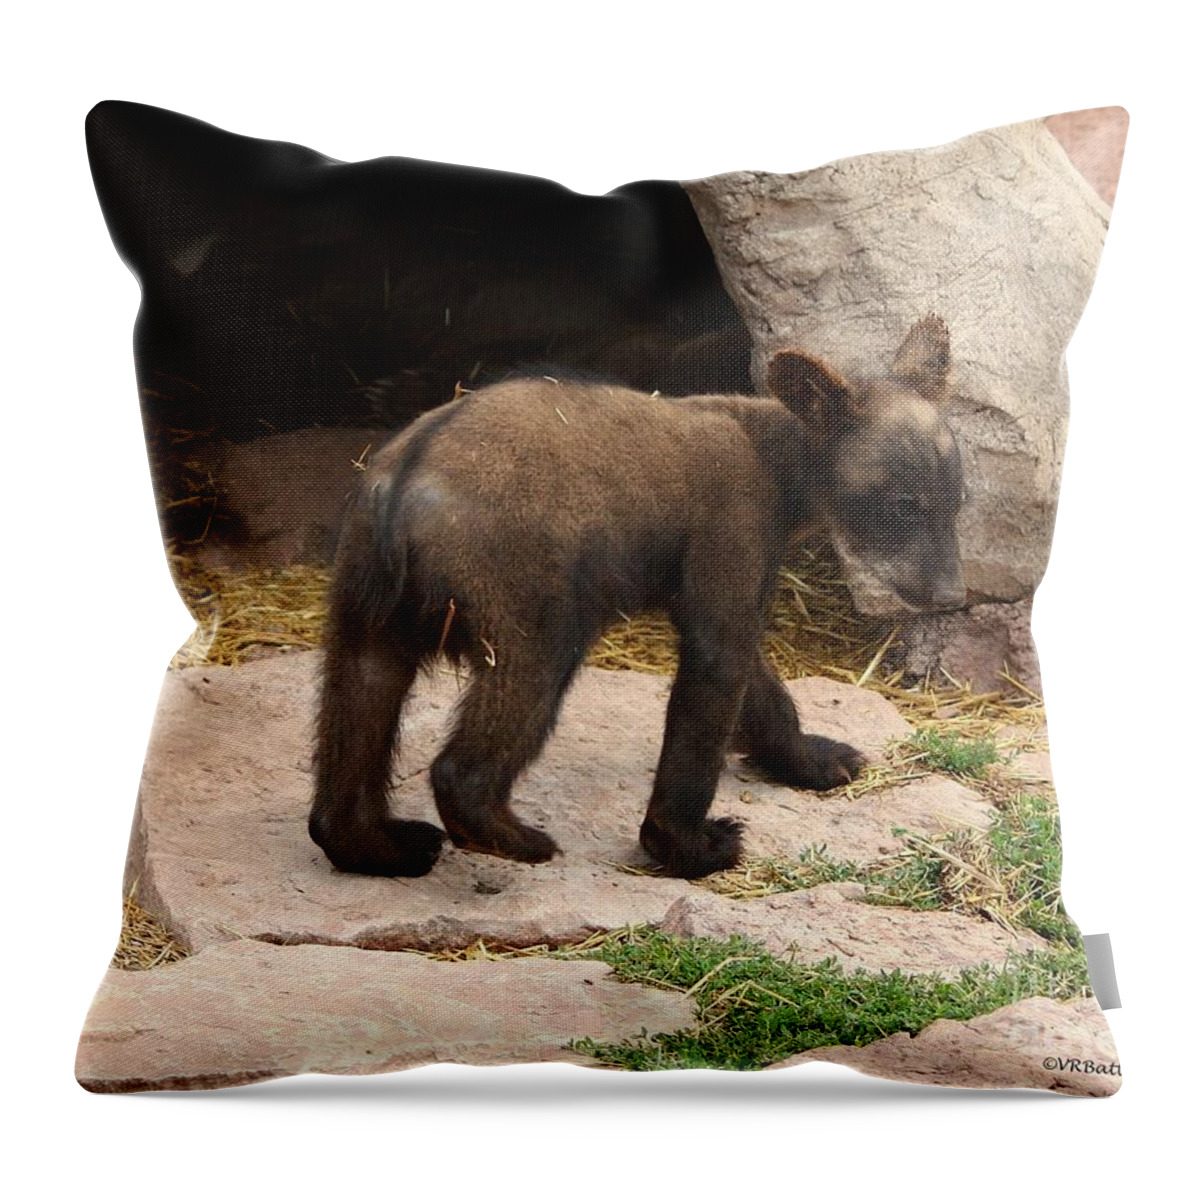 Bear Throw Pillow featuring the photograph Baby by Veronica Batterson